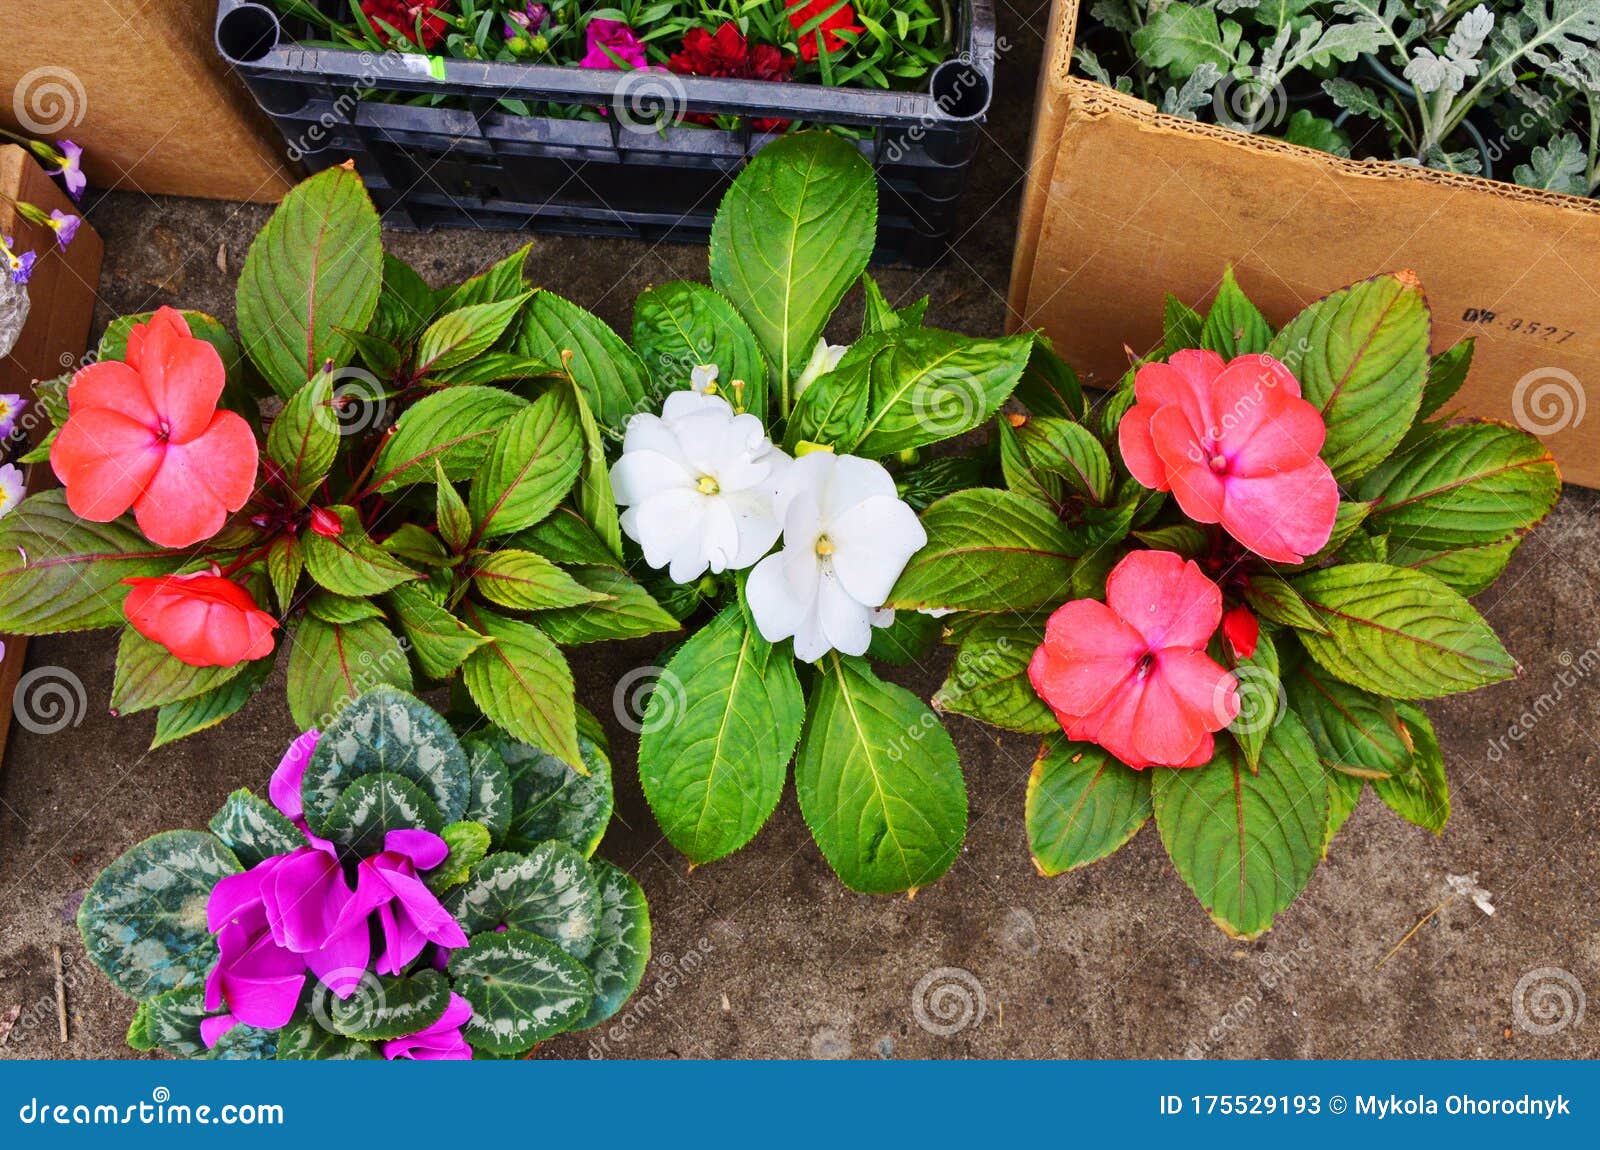 Impatiens Flowers On Flower Bed In The Garden Stock Image Image Of Park Closeup 175529193